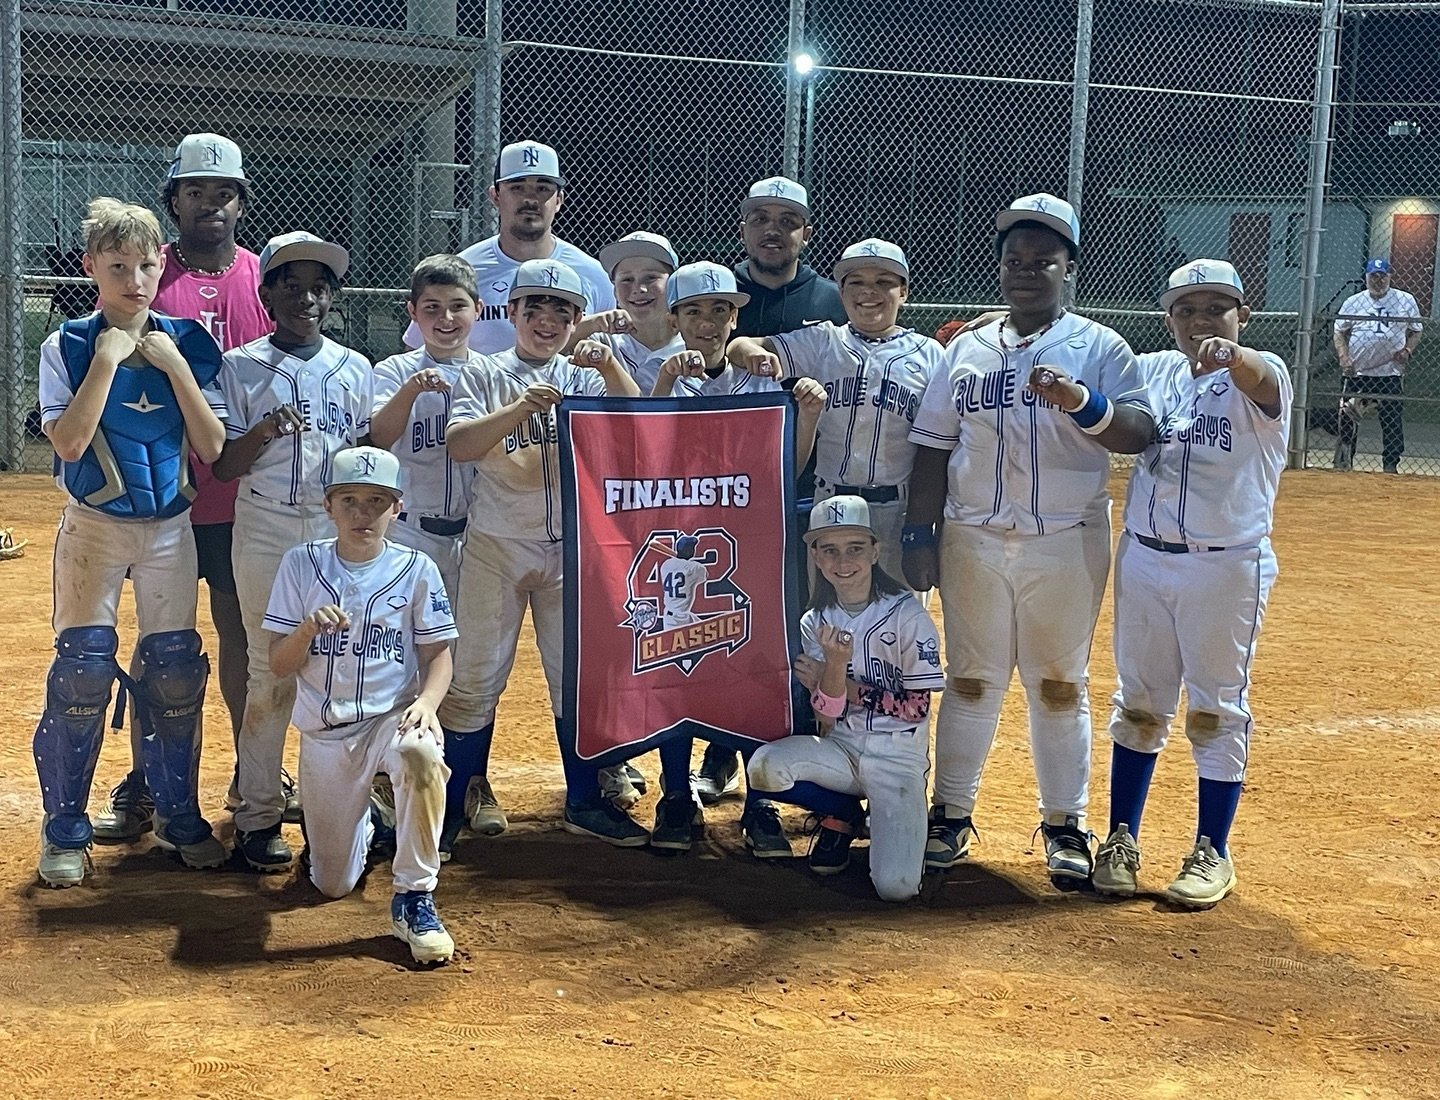 CONGRATULATIONS to the Ninth Inning Blue Jays 11u Sprull on going 4-1 and finish as the runner up of the Training Legends 42 Classic! GO JAYS!